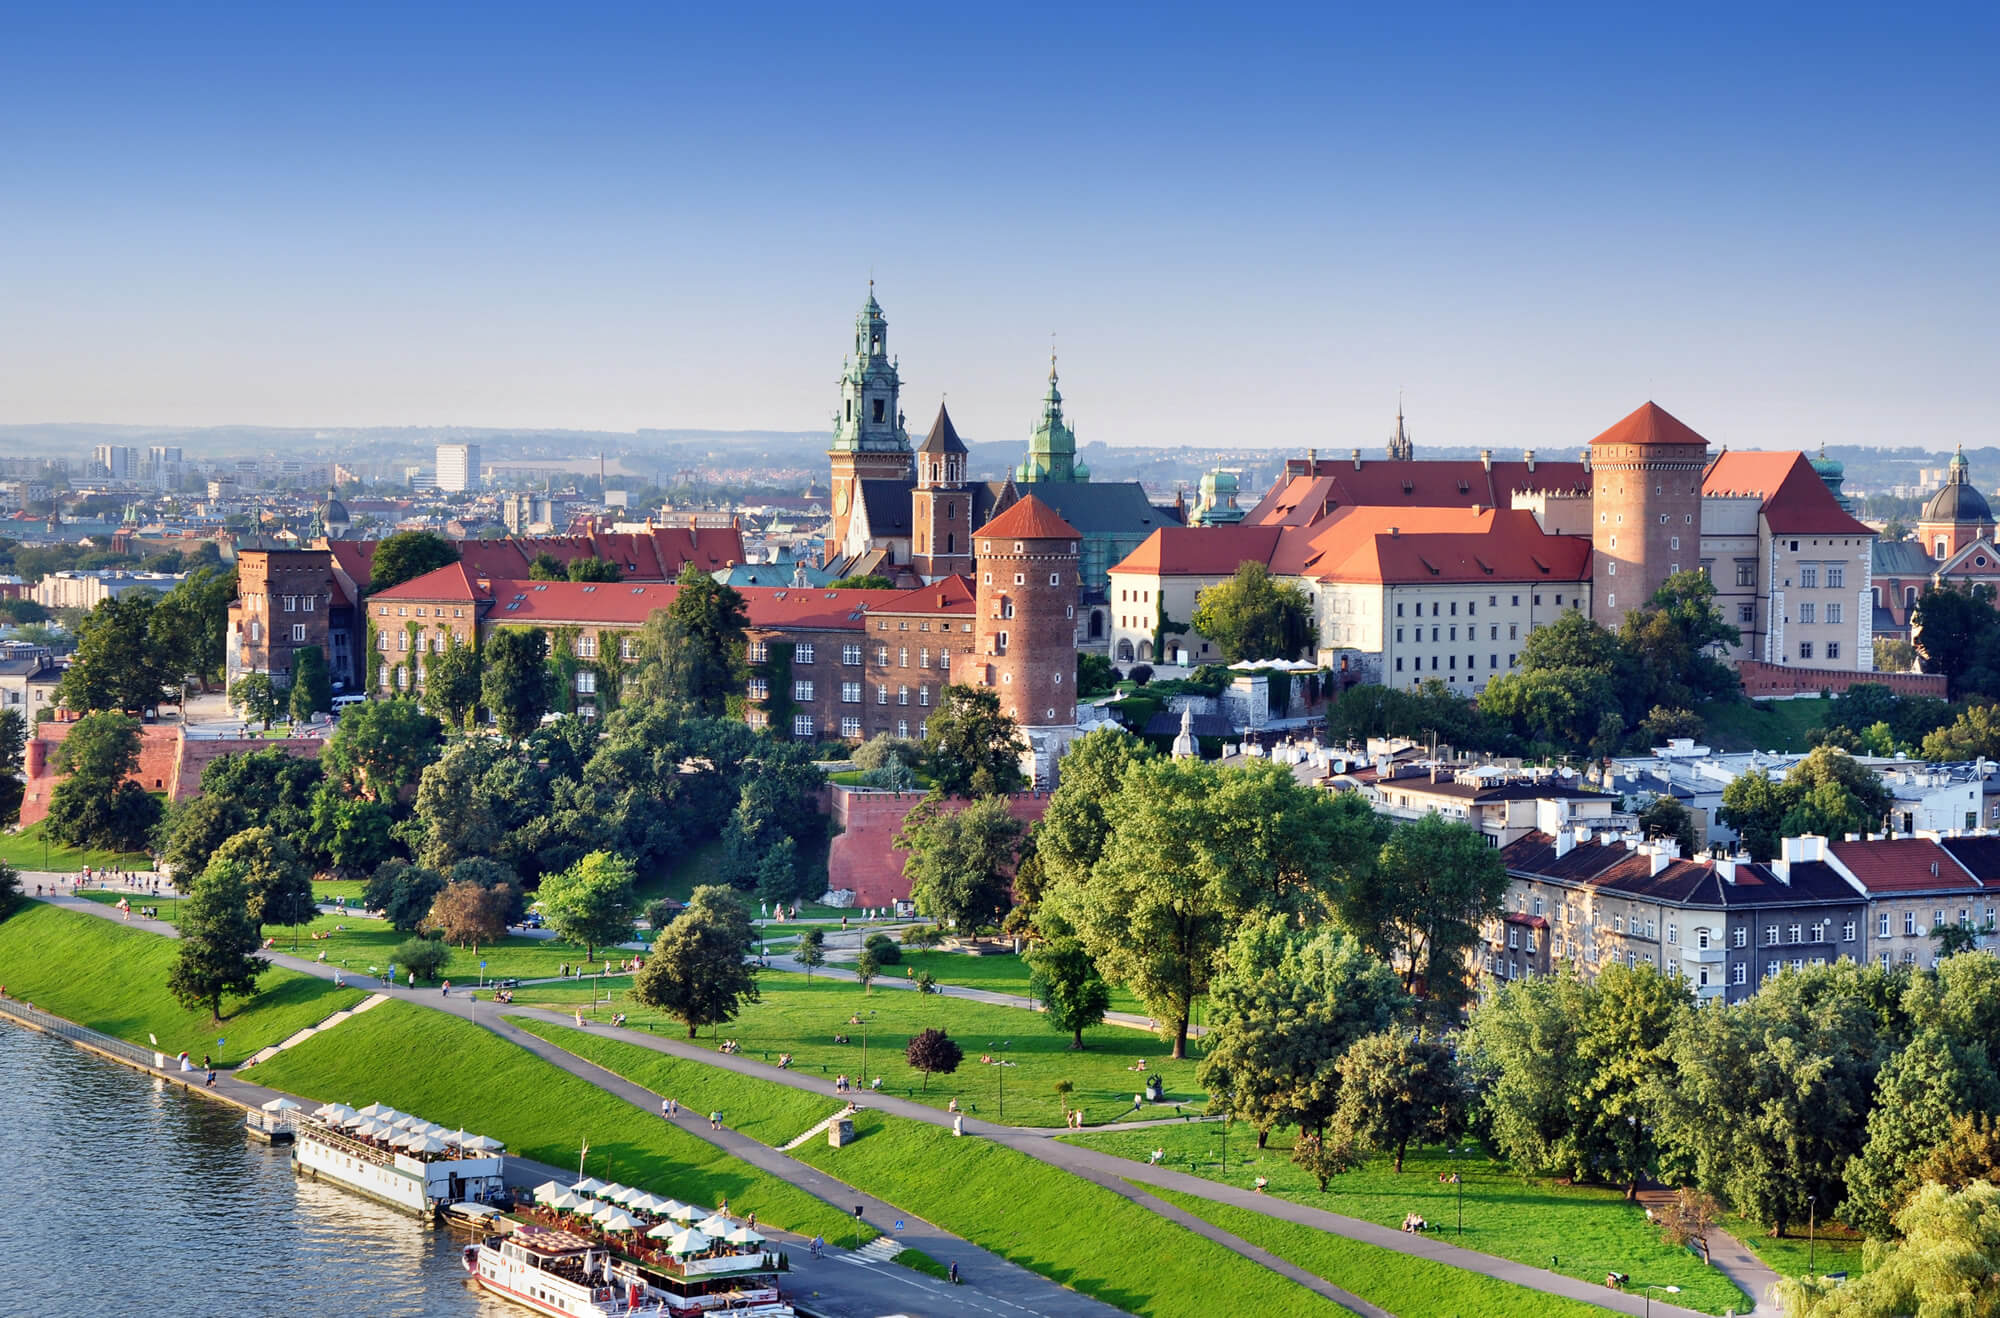 Wawel castle in Cracow, Poland